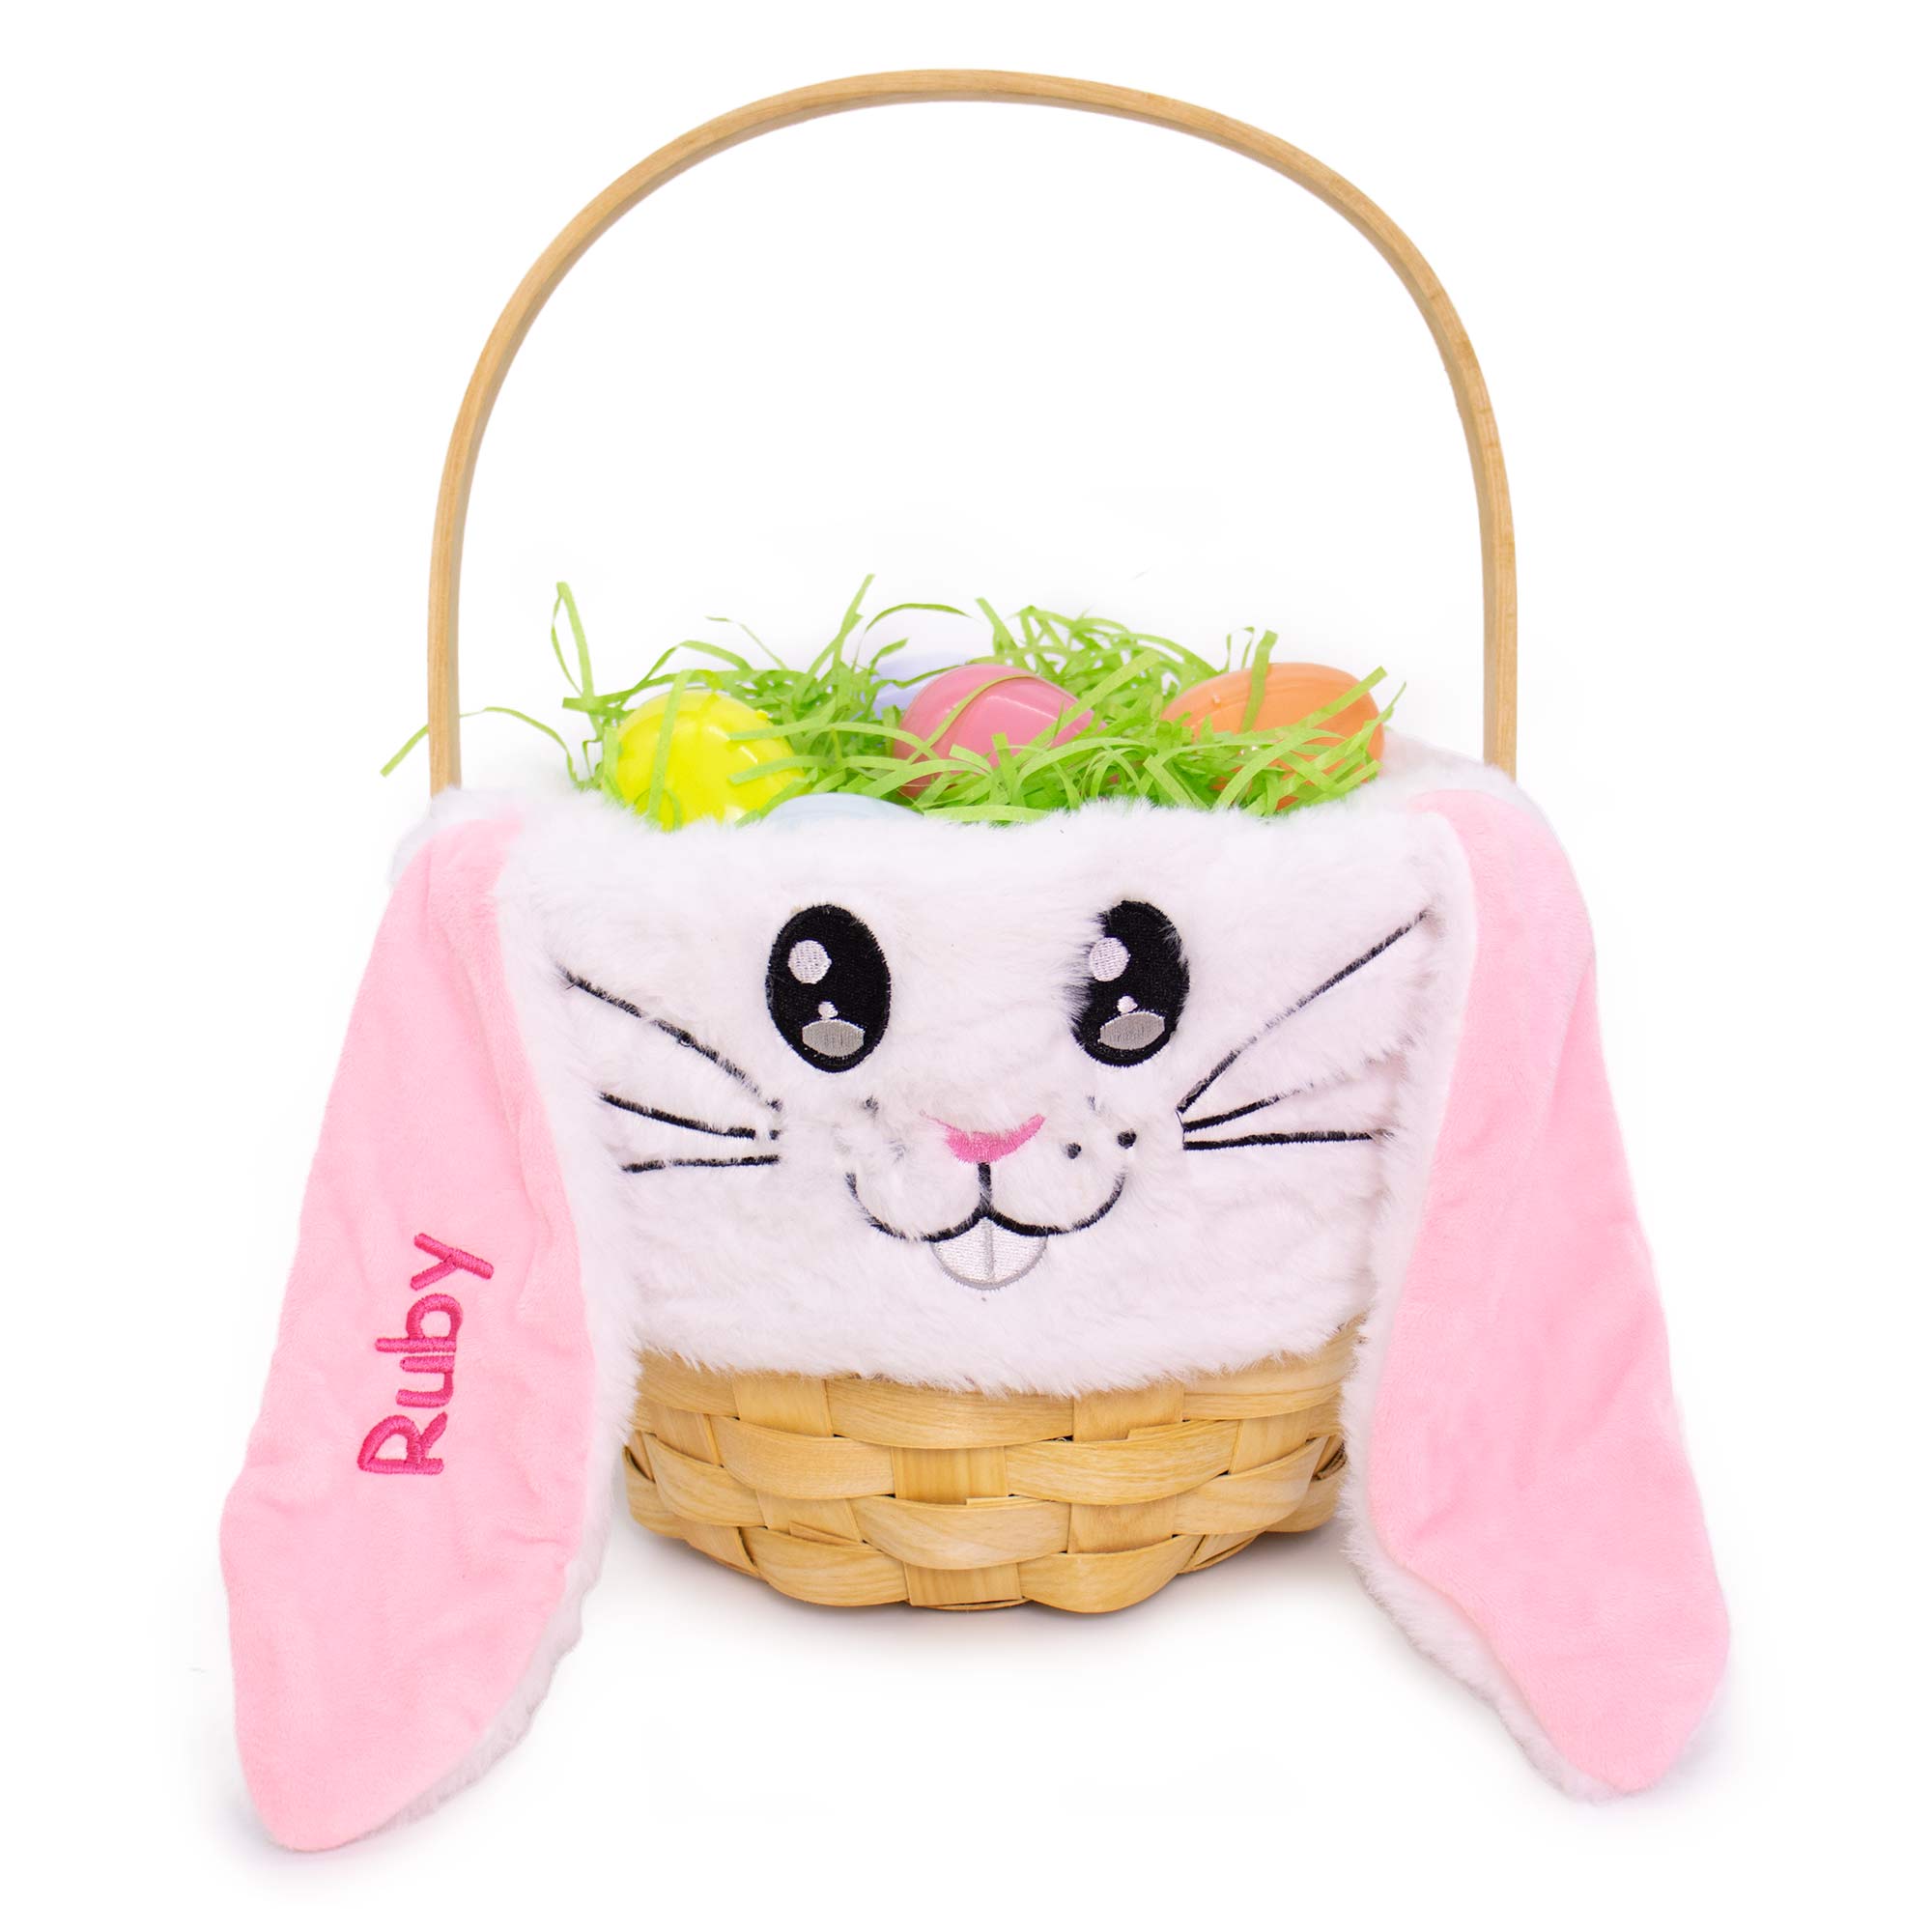 Personalized Classic Wicker Woodchip Easter Basket - Plush Pink Bunny Liner